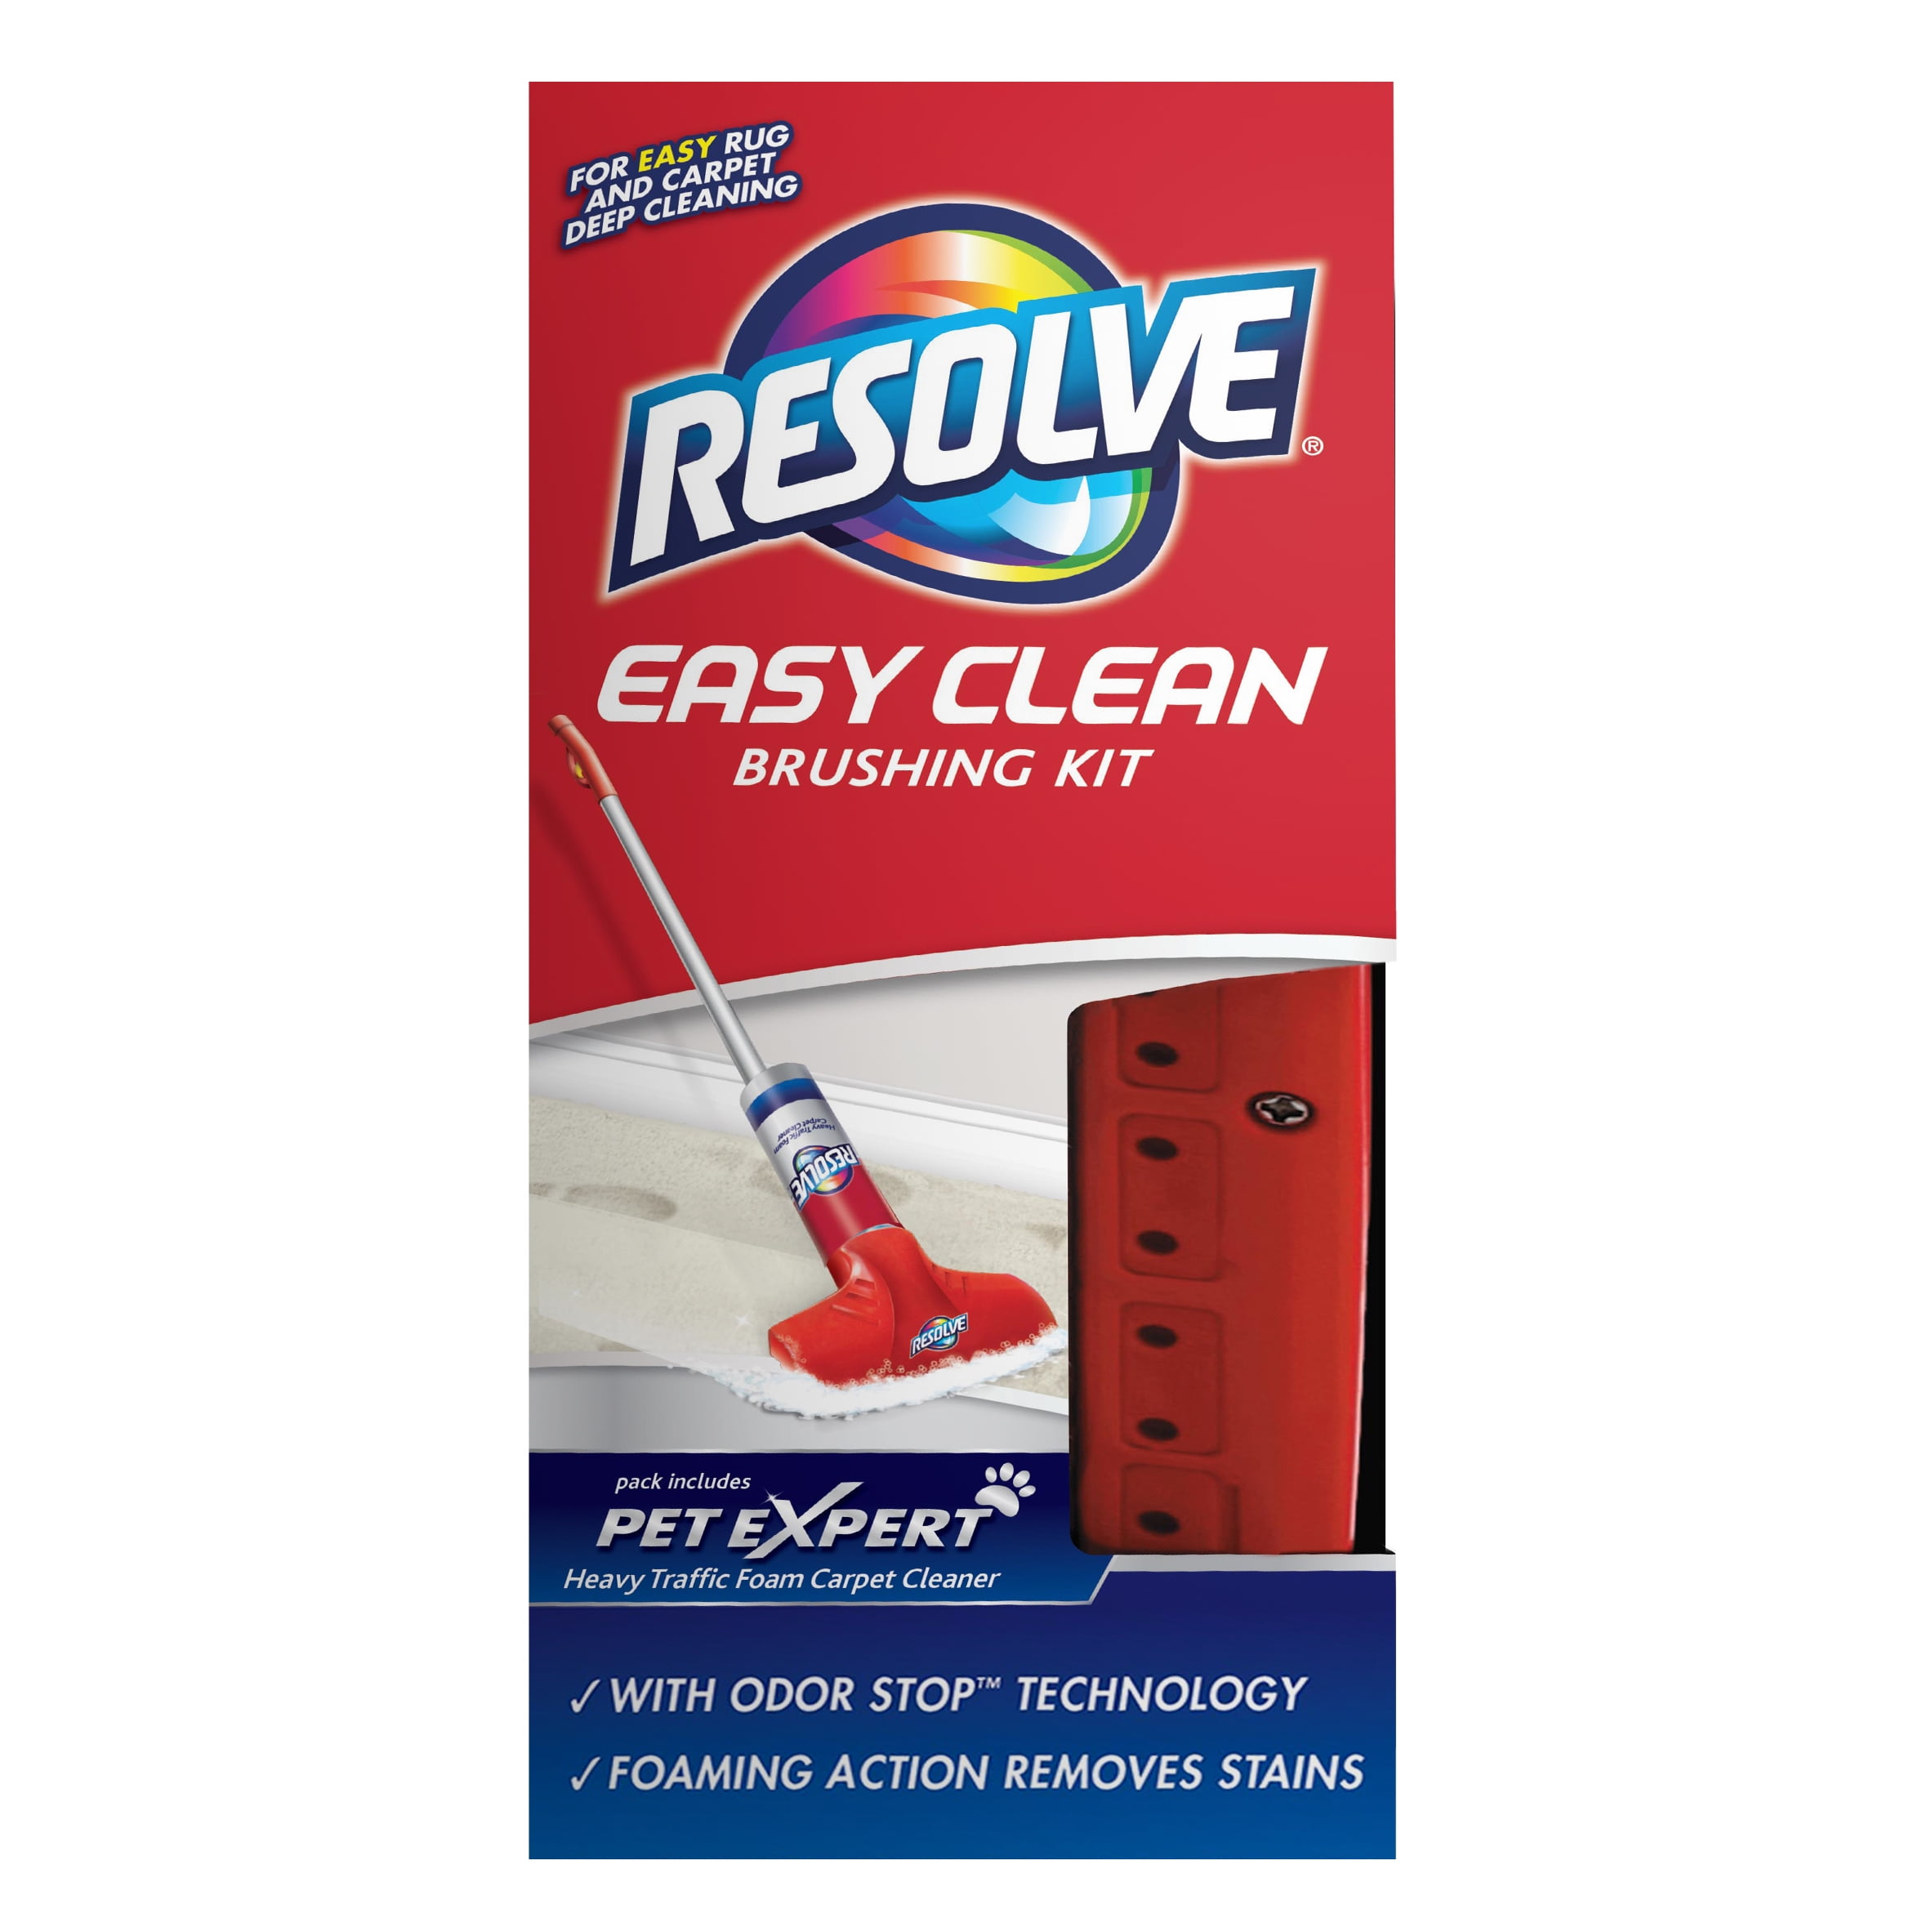 Easy Clean Carpet Cleaner Gadget Foam, Can You Use Resolve Carpet Cleaner On Car Seats